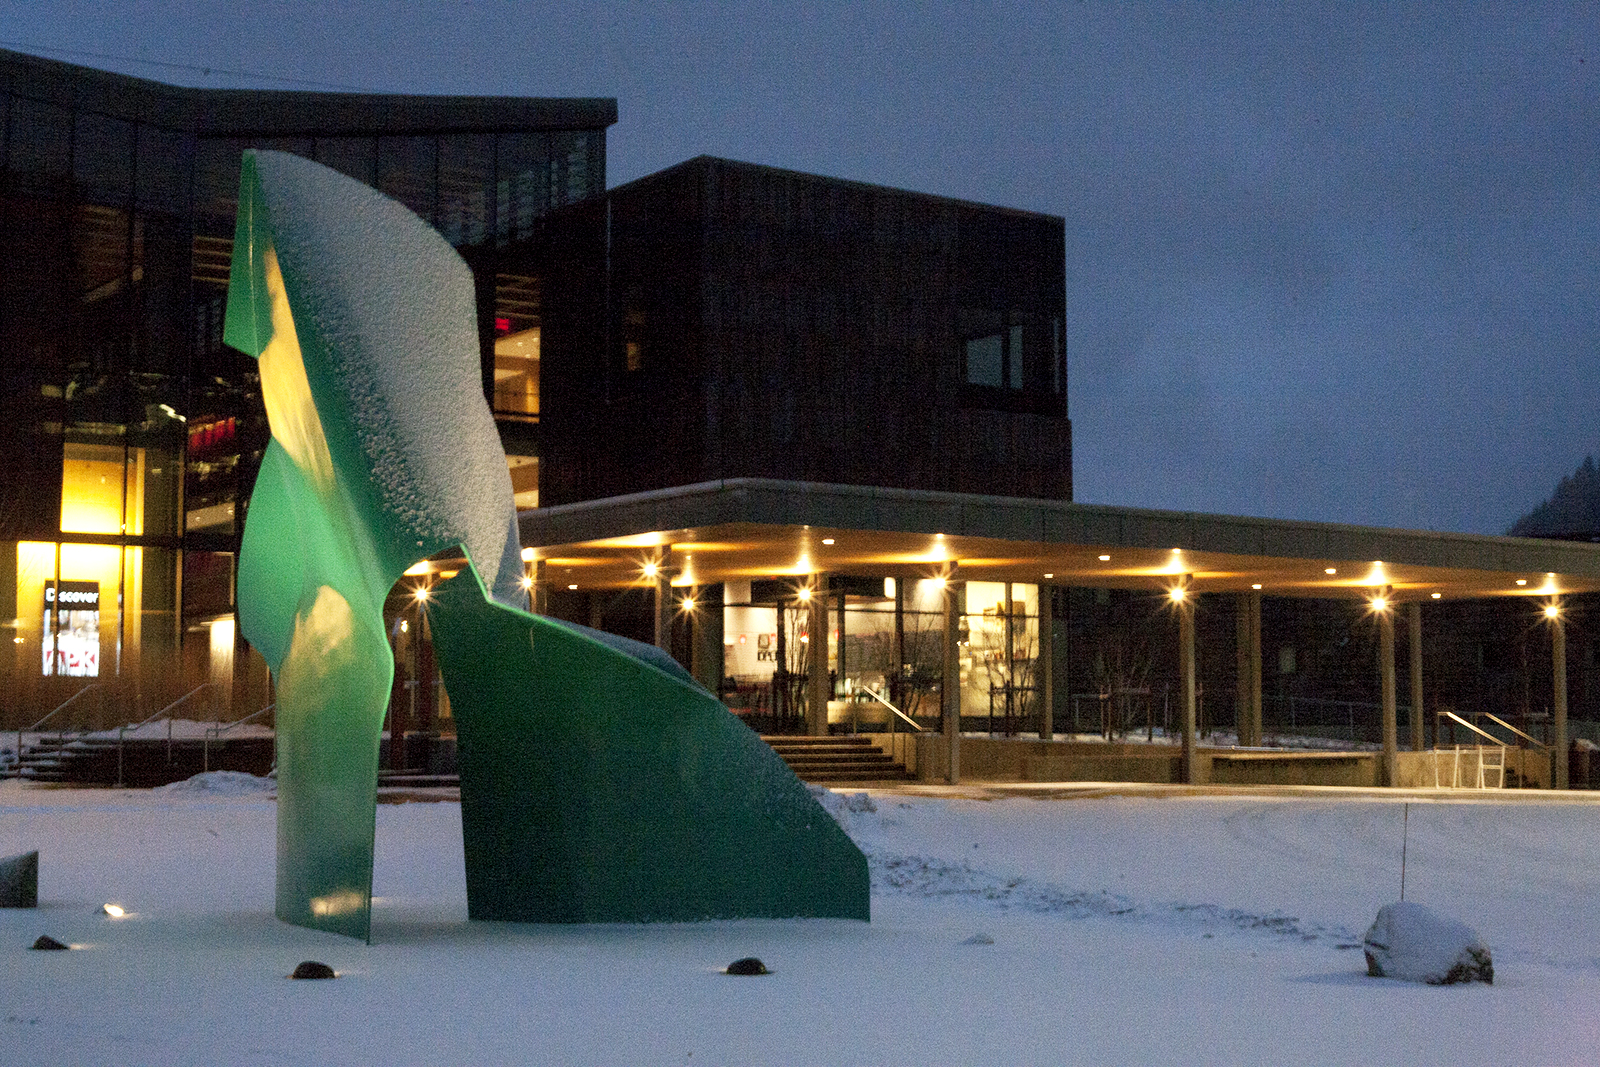 Snow accumulates on the Nimbus sculpture Monday morning, Feb. 12, 2018, outside of the Andrew P. Kashevaroff Building, which houses the State Library and Archives Museum, in Juneau, Alaska. (Photo by Tripp J Crouse/KTOO)